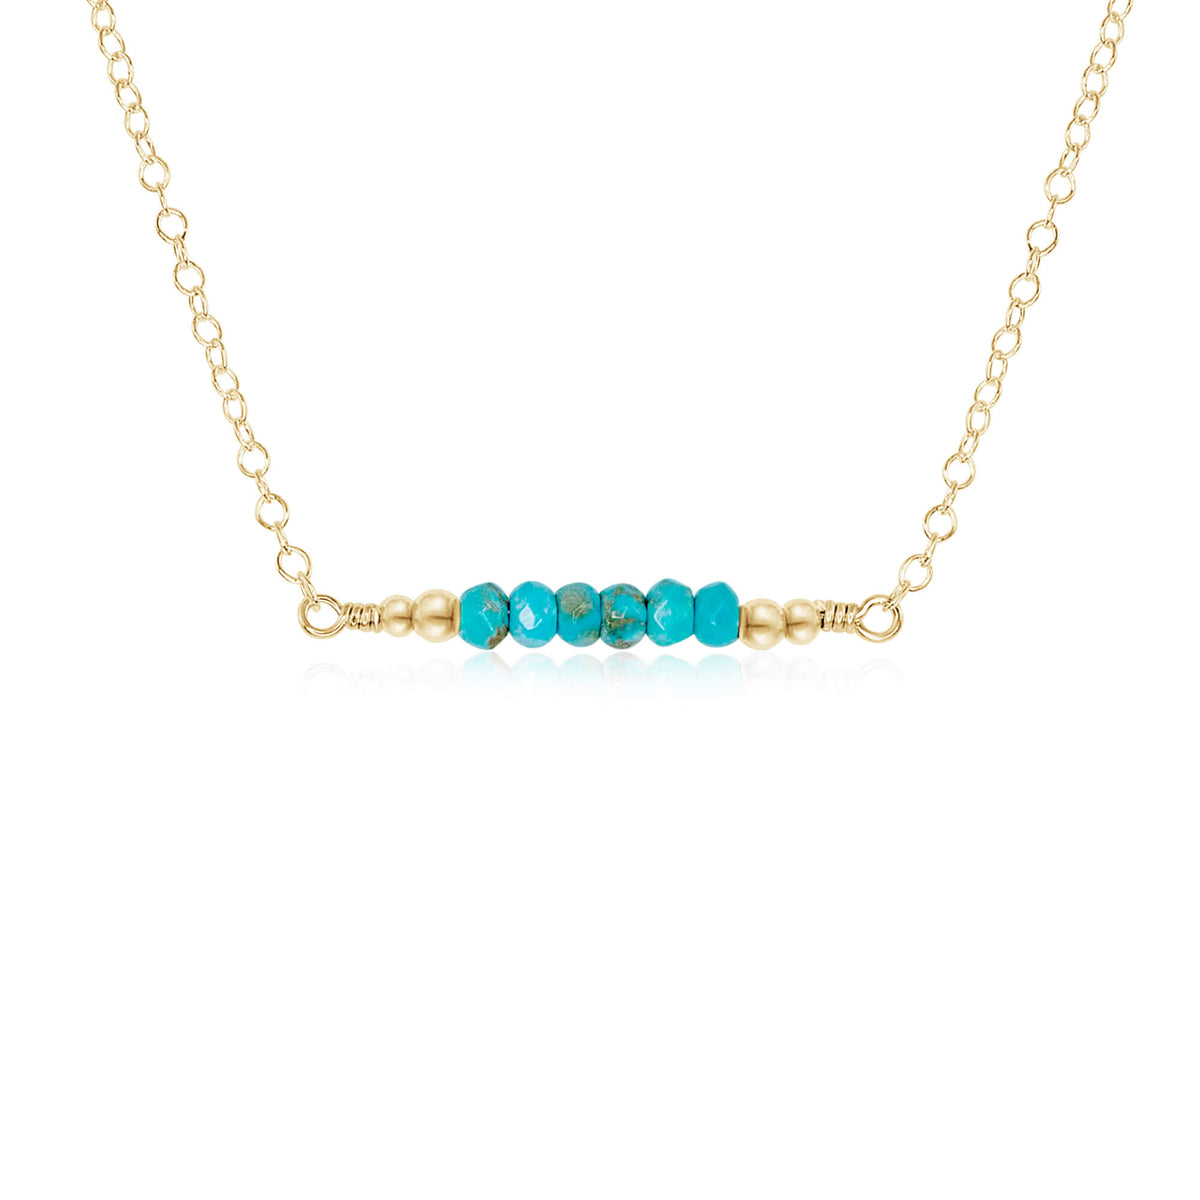 Faceted Bead Bar Necklace - Turquoise - 14K Gold Fill - Luna Tide Handmade Jewellery